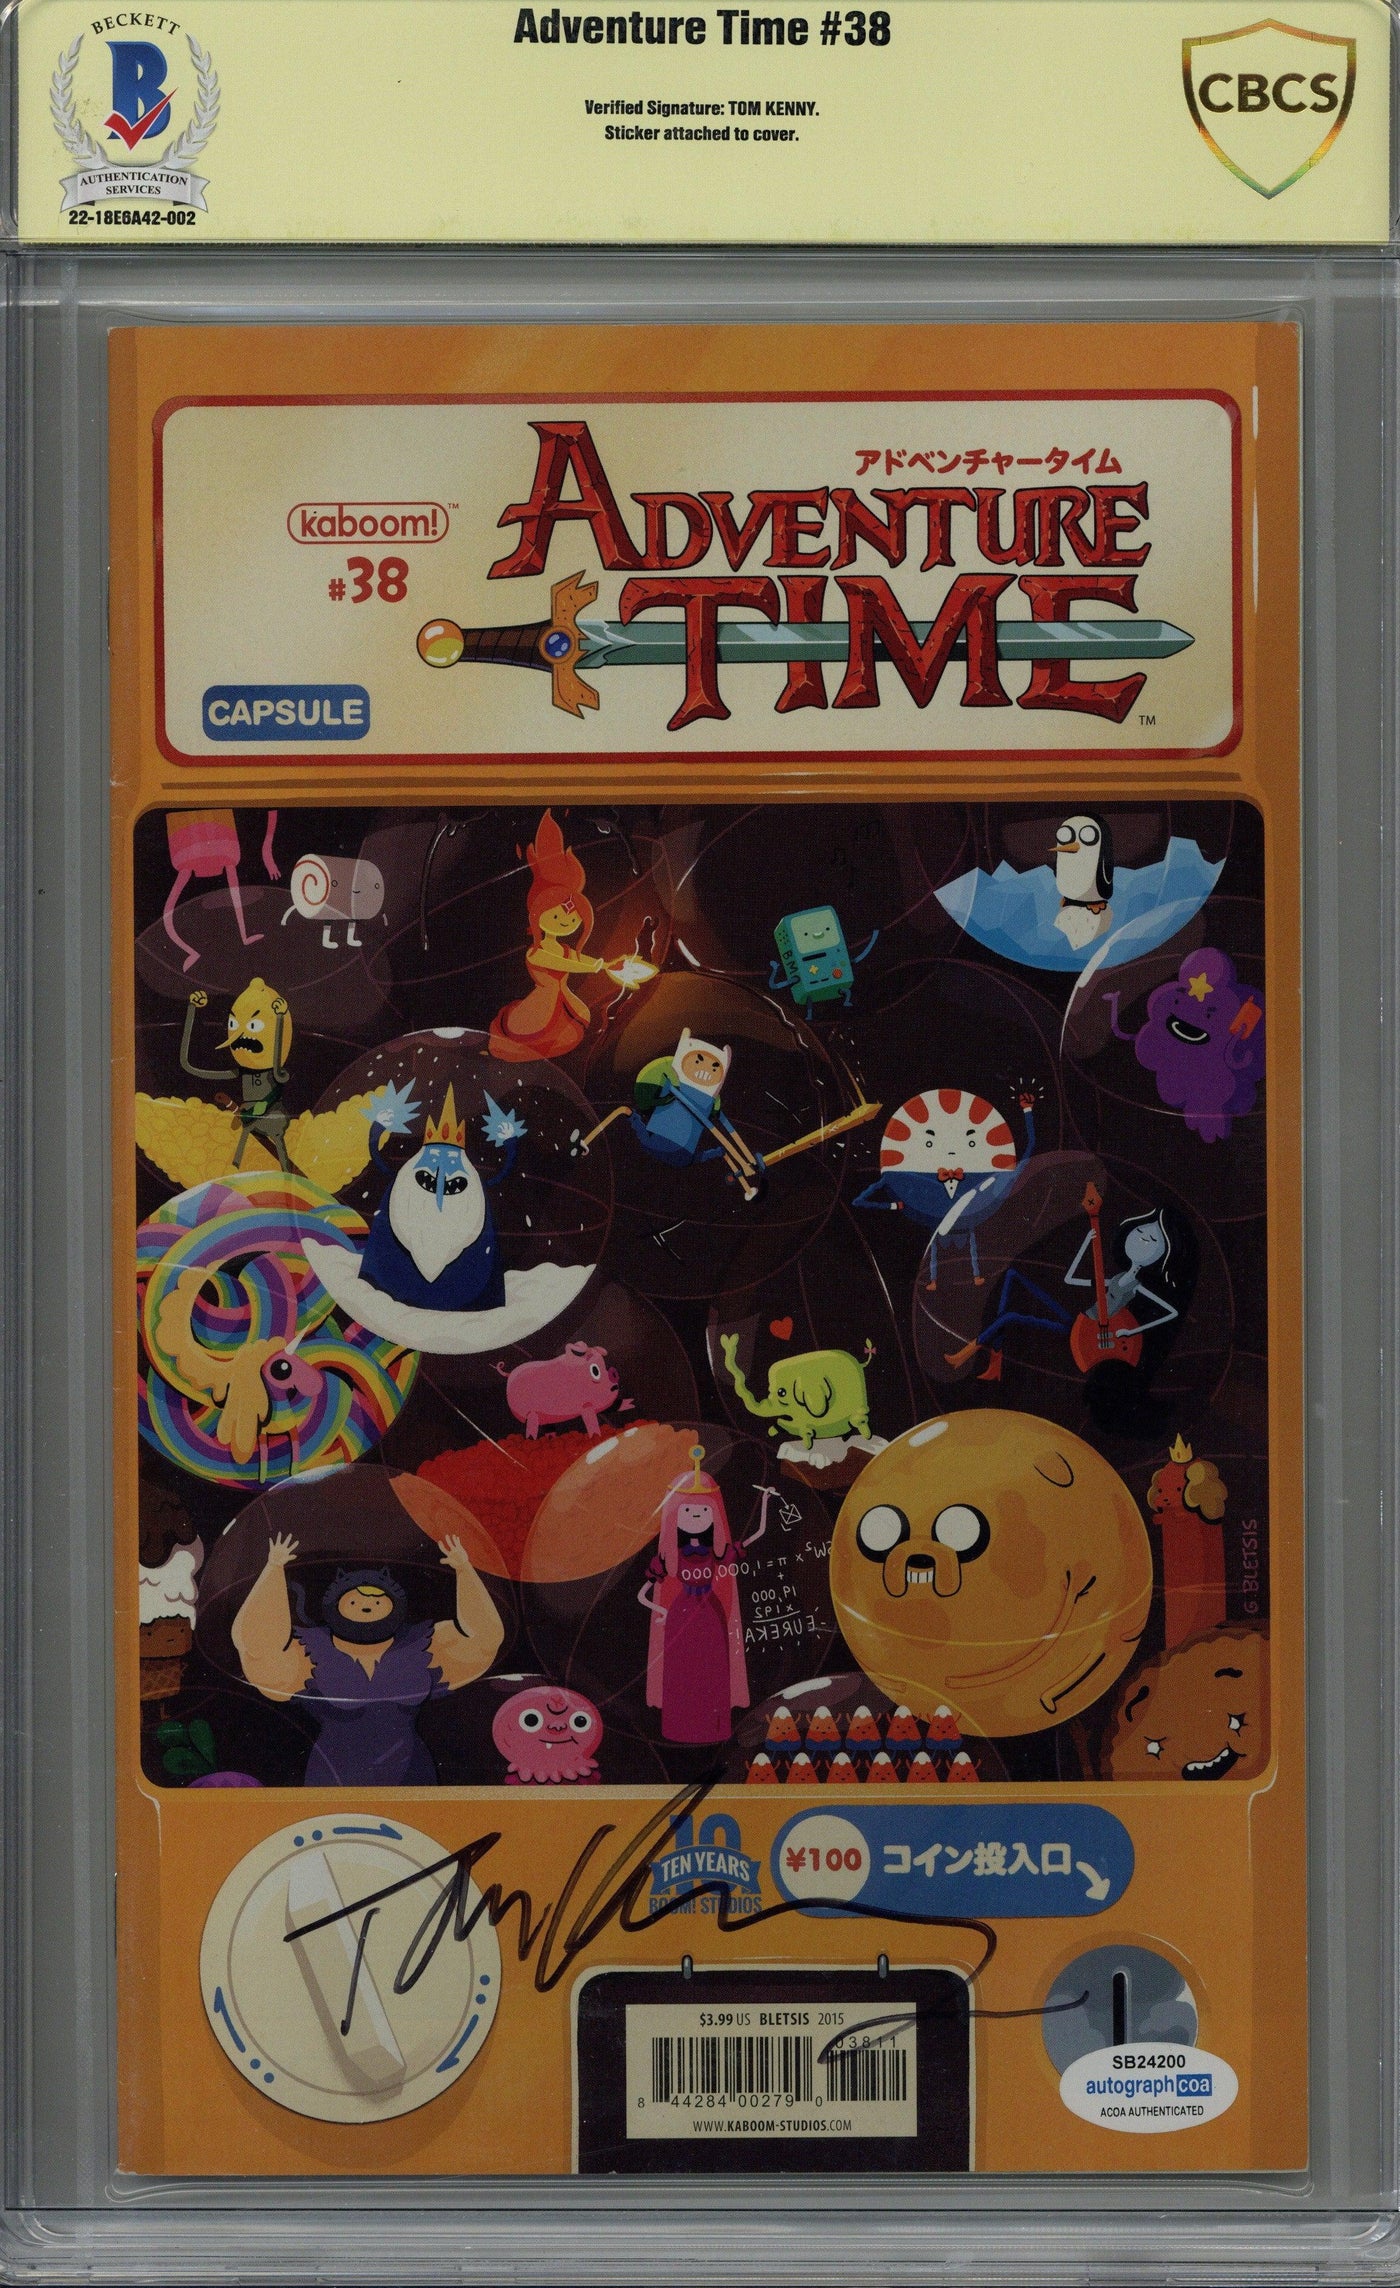 Tom Kenny Signed Adventure Time #38 Comic Book CBCS